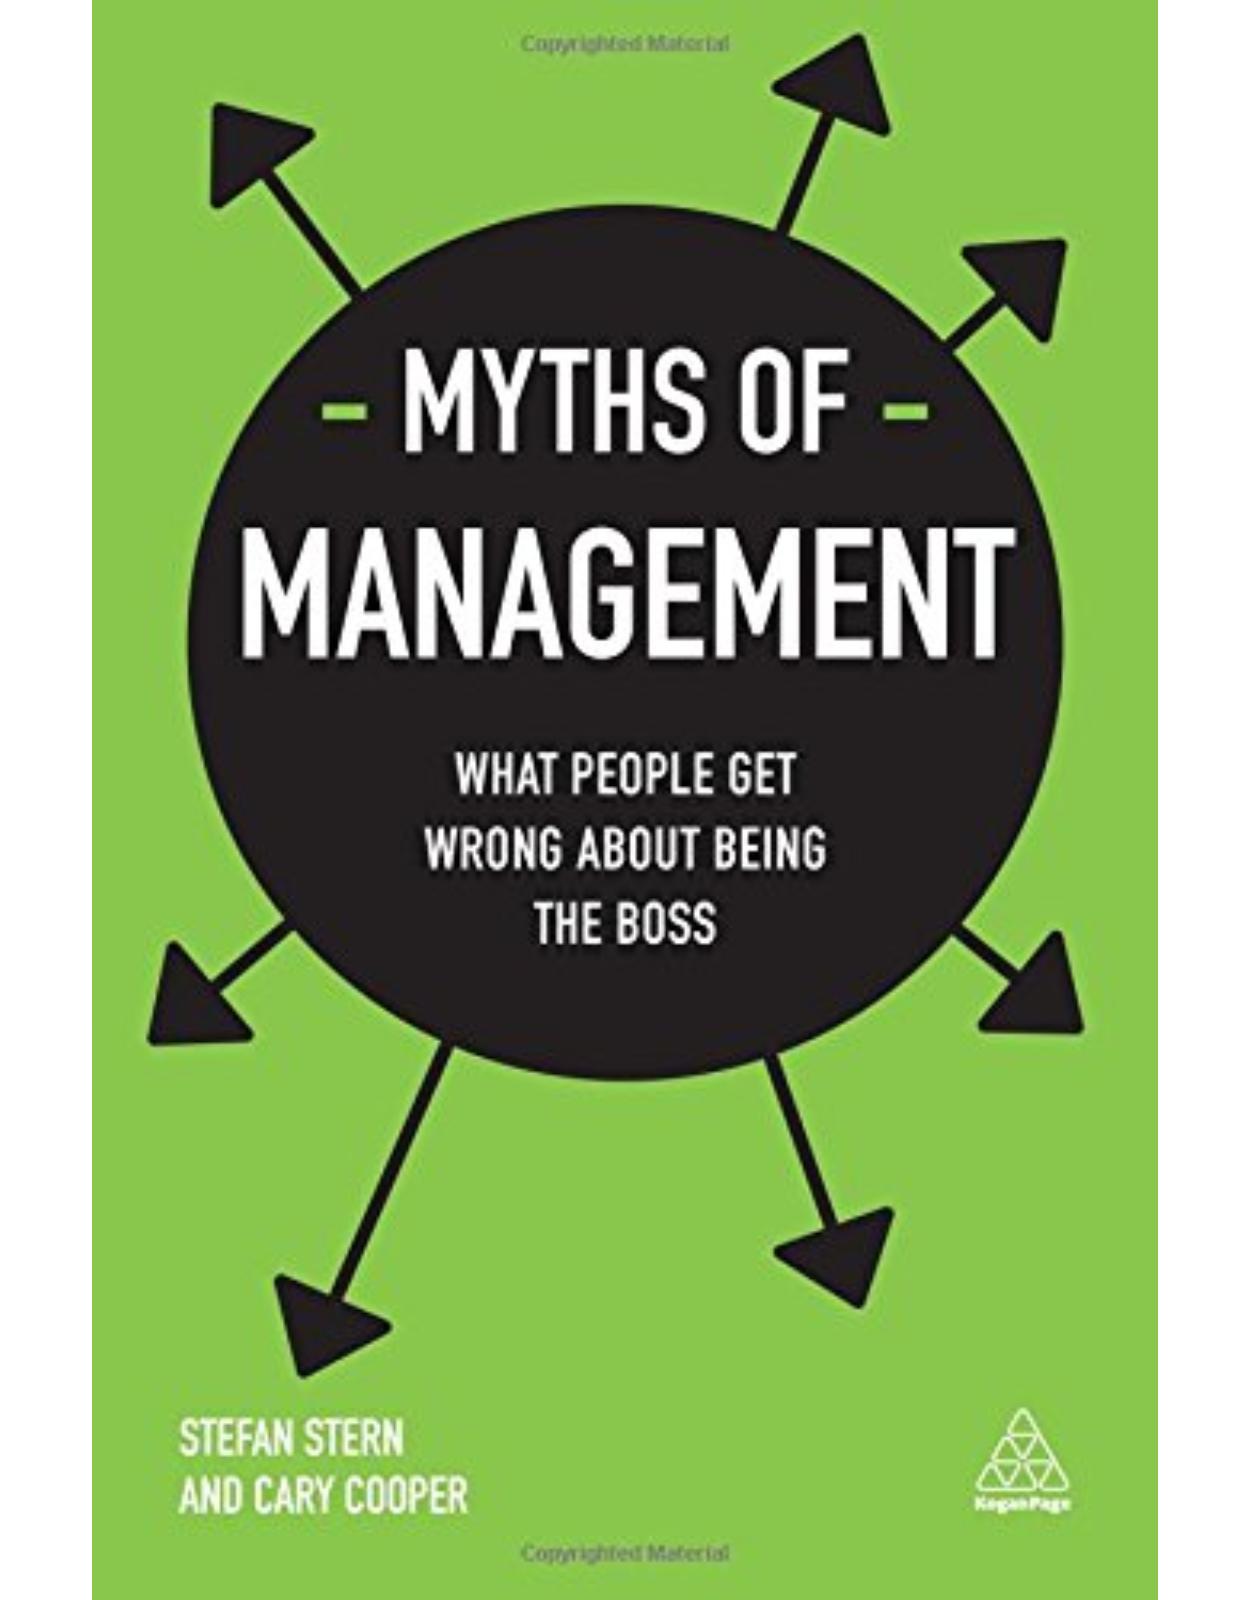 Myths of Management: What People Get Wrong About Being the Boss